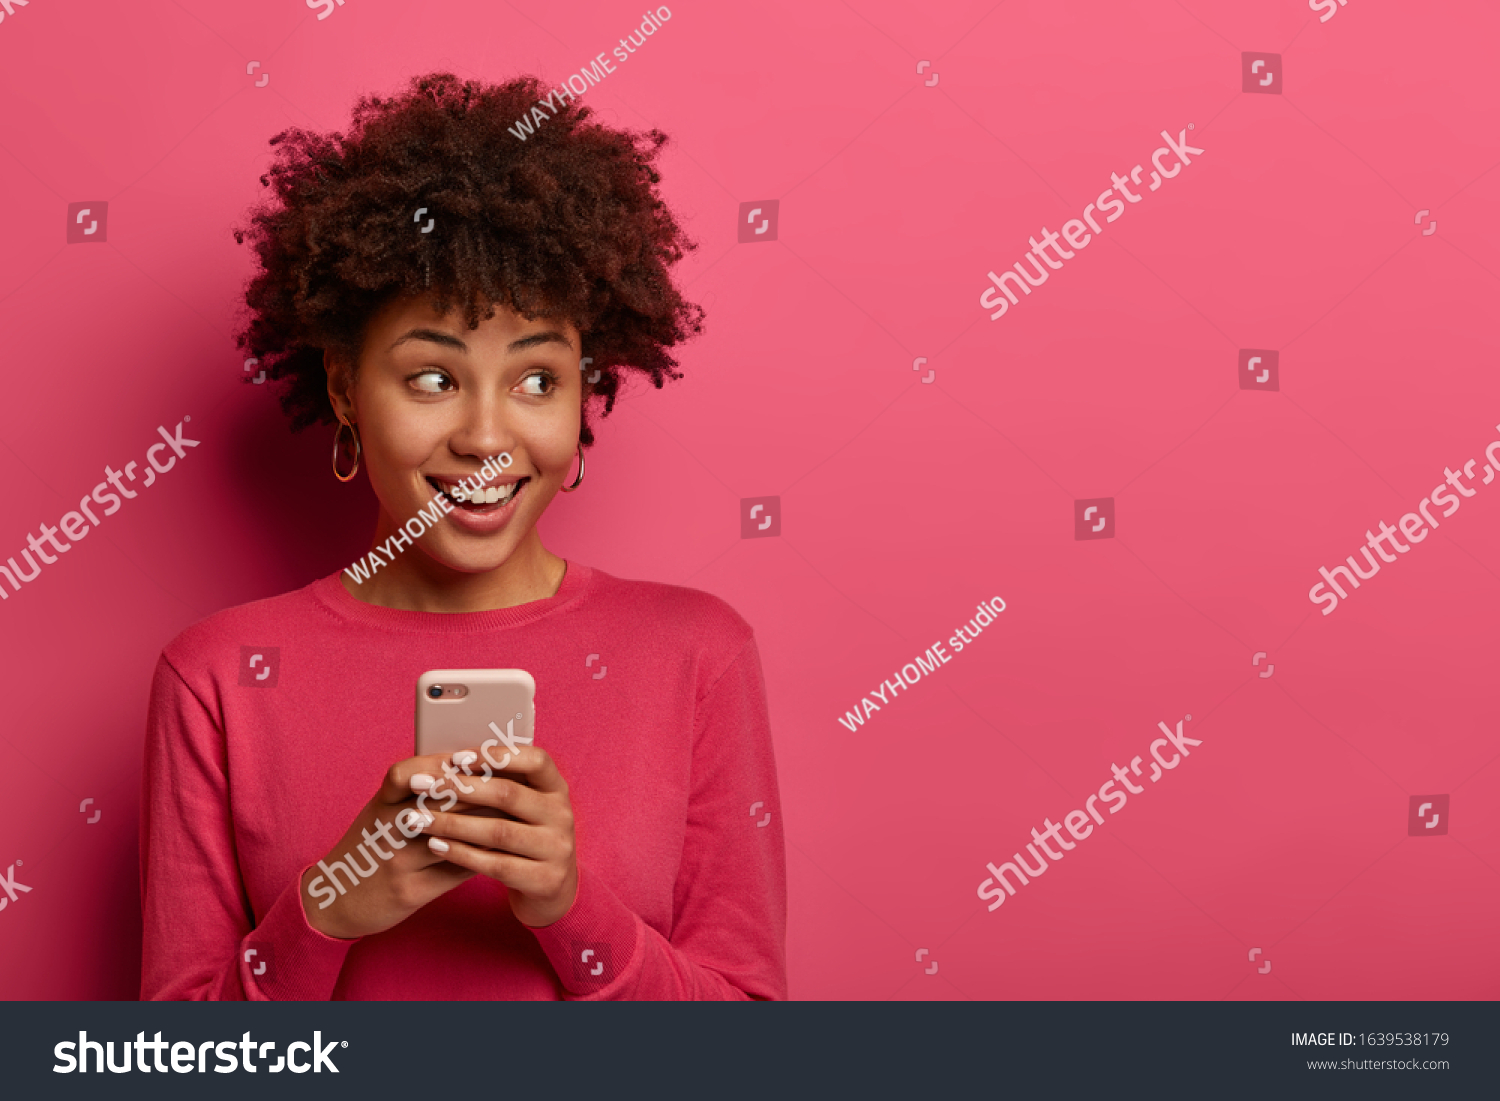 Portrait of cute curly haired girl scrolls social networks or does shopping online, looks aside positively, uses modern smartphone, wears pink sweater, poses indoor in studio, reads message. #1639538179